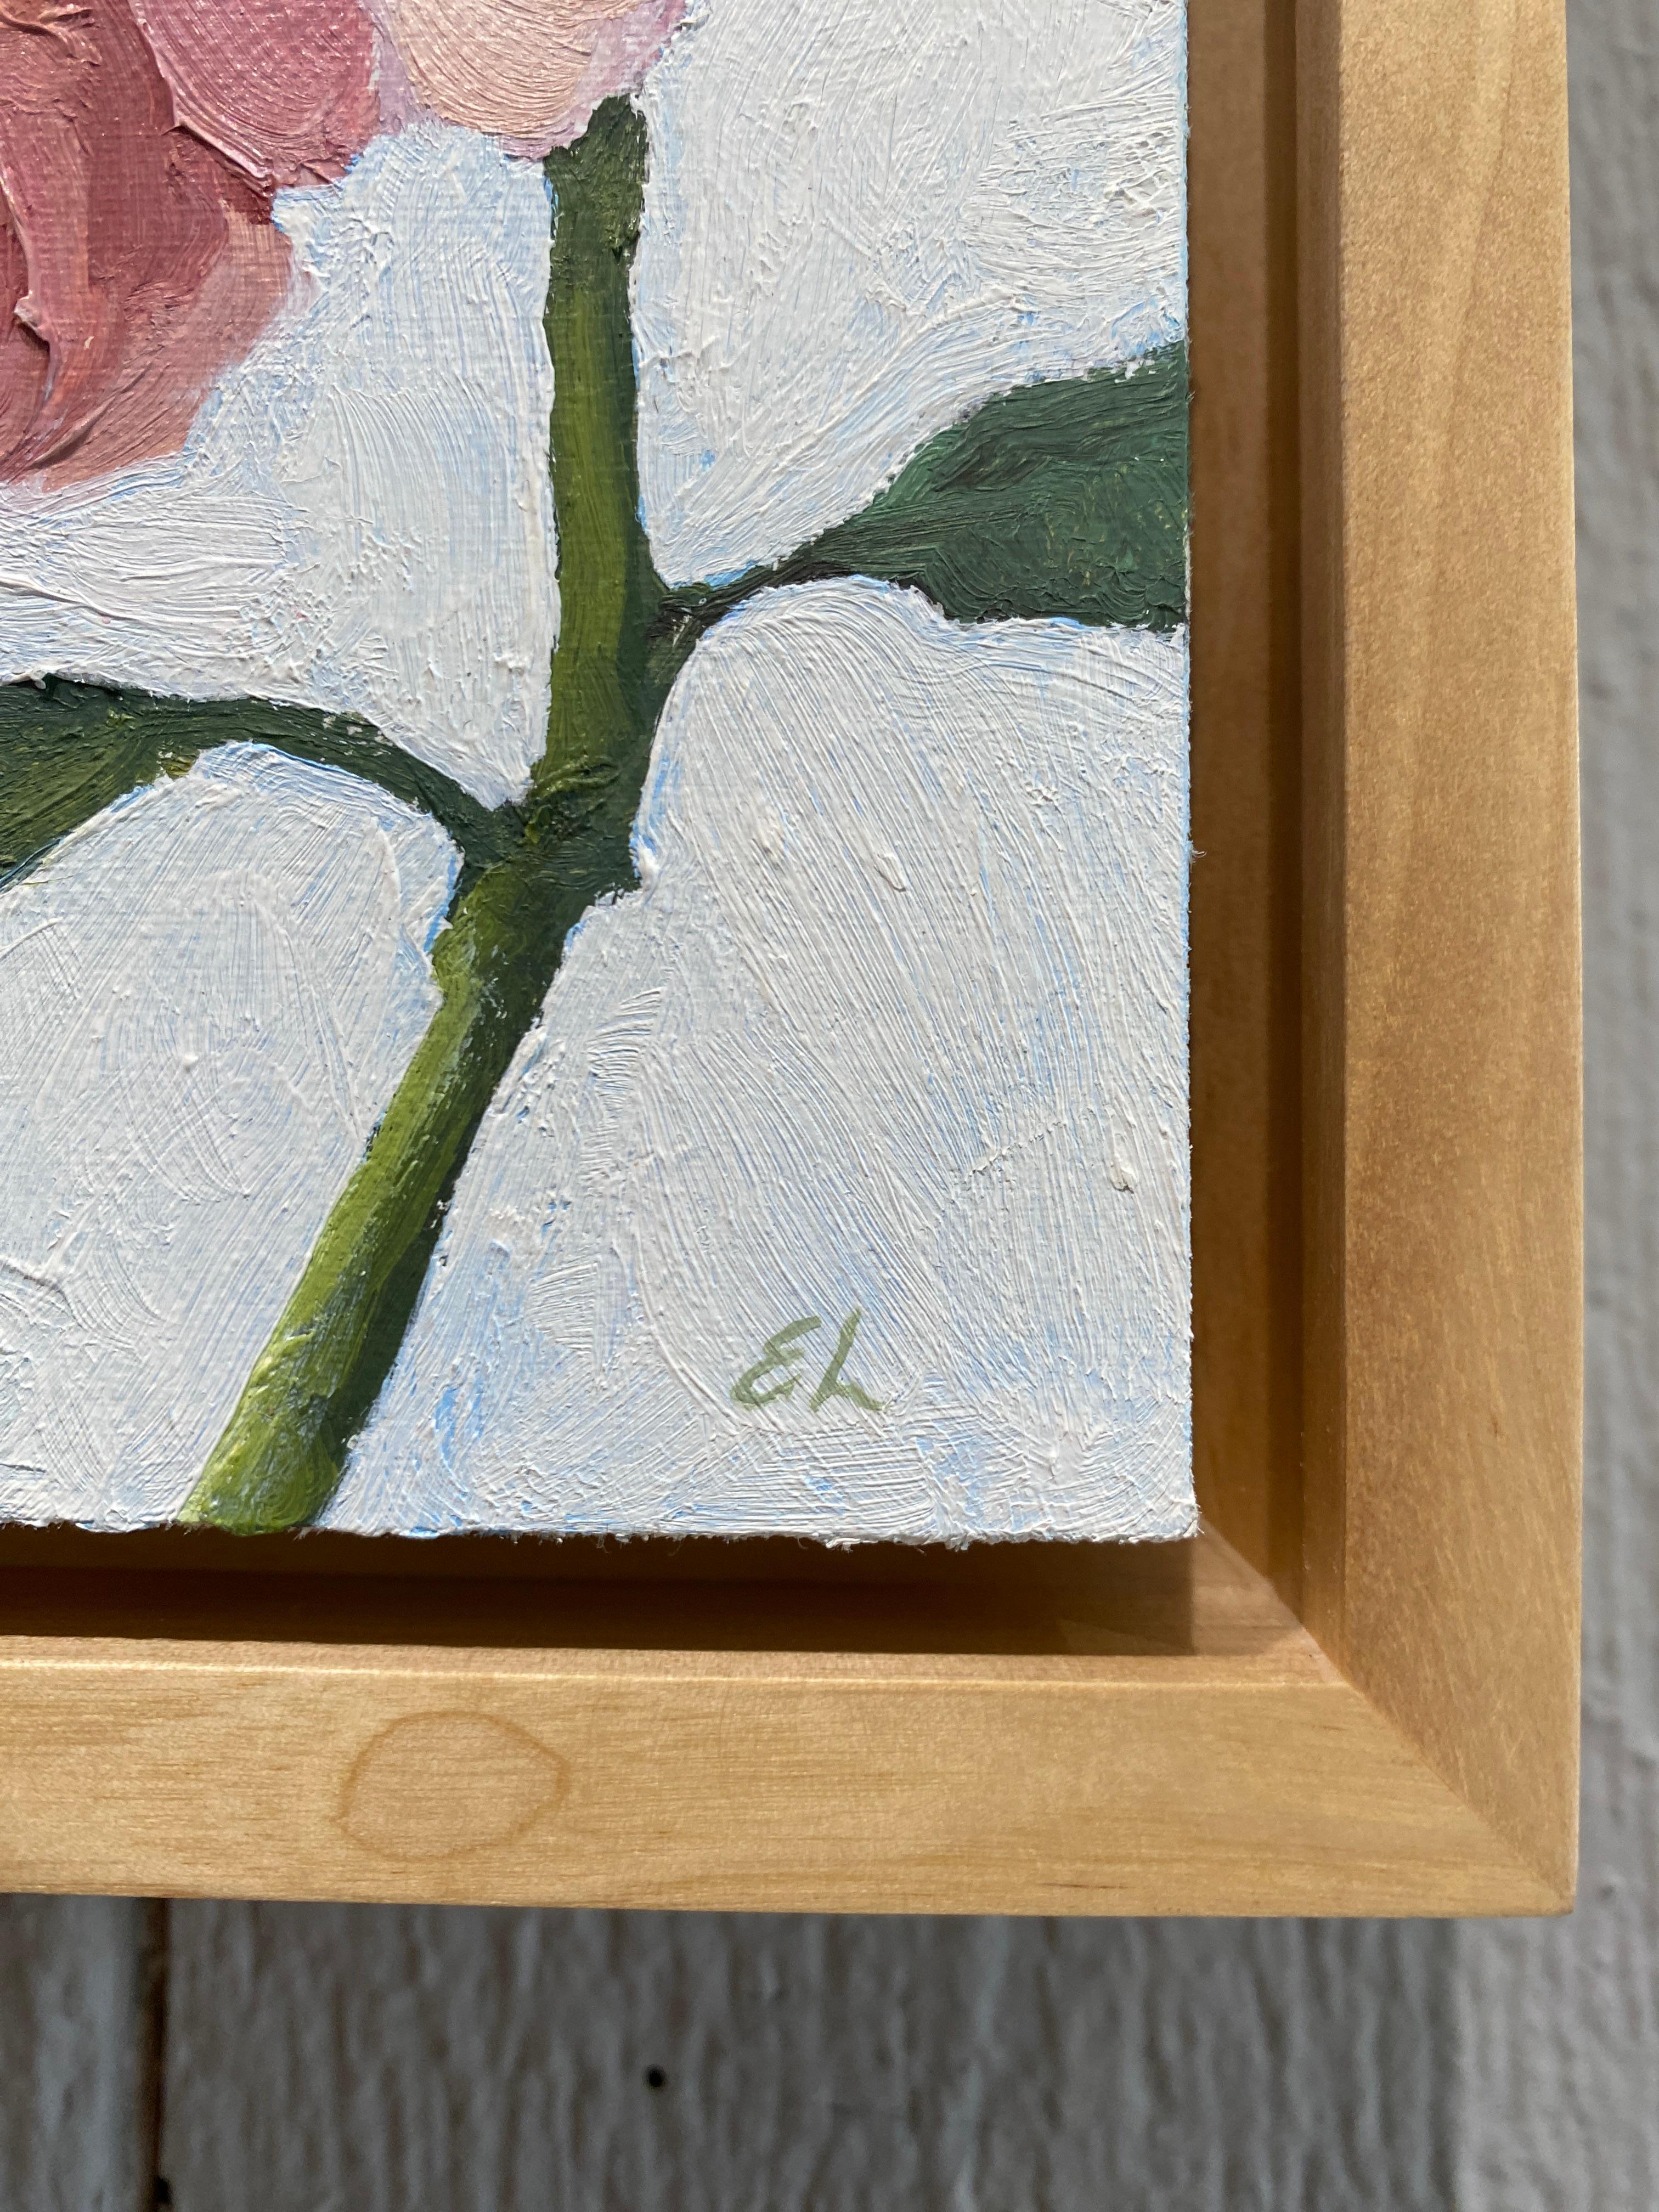 A small square oil painting of a pink peony on a white background. 

Framed in a modern natural wood floating frame. 